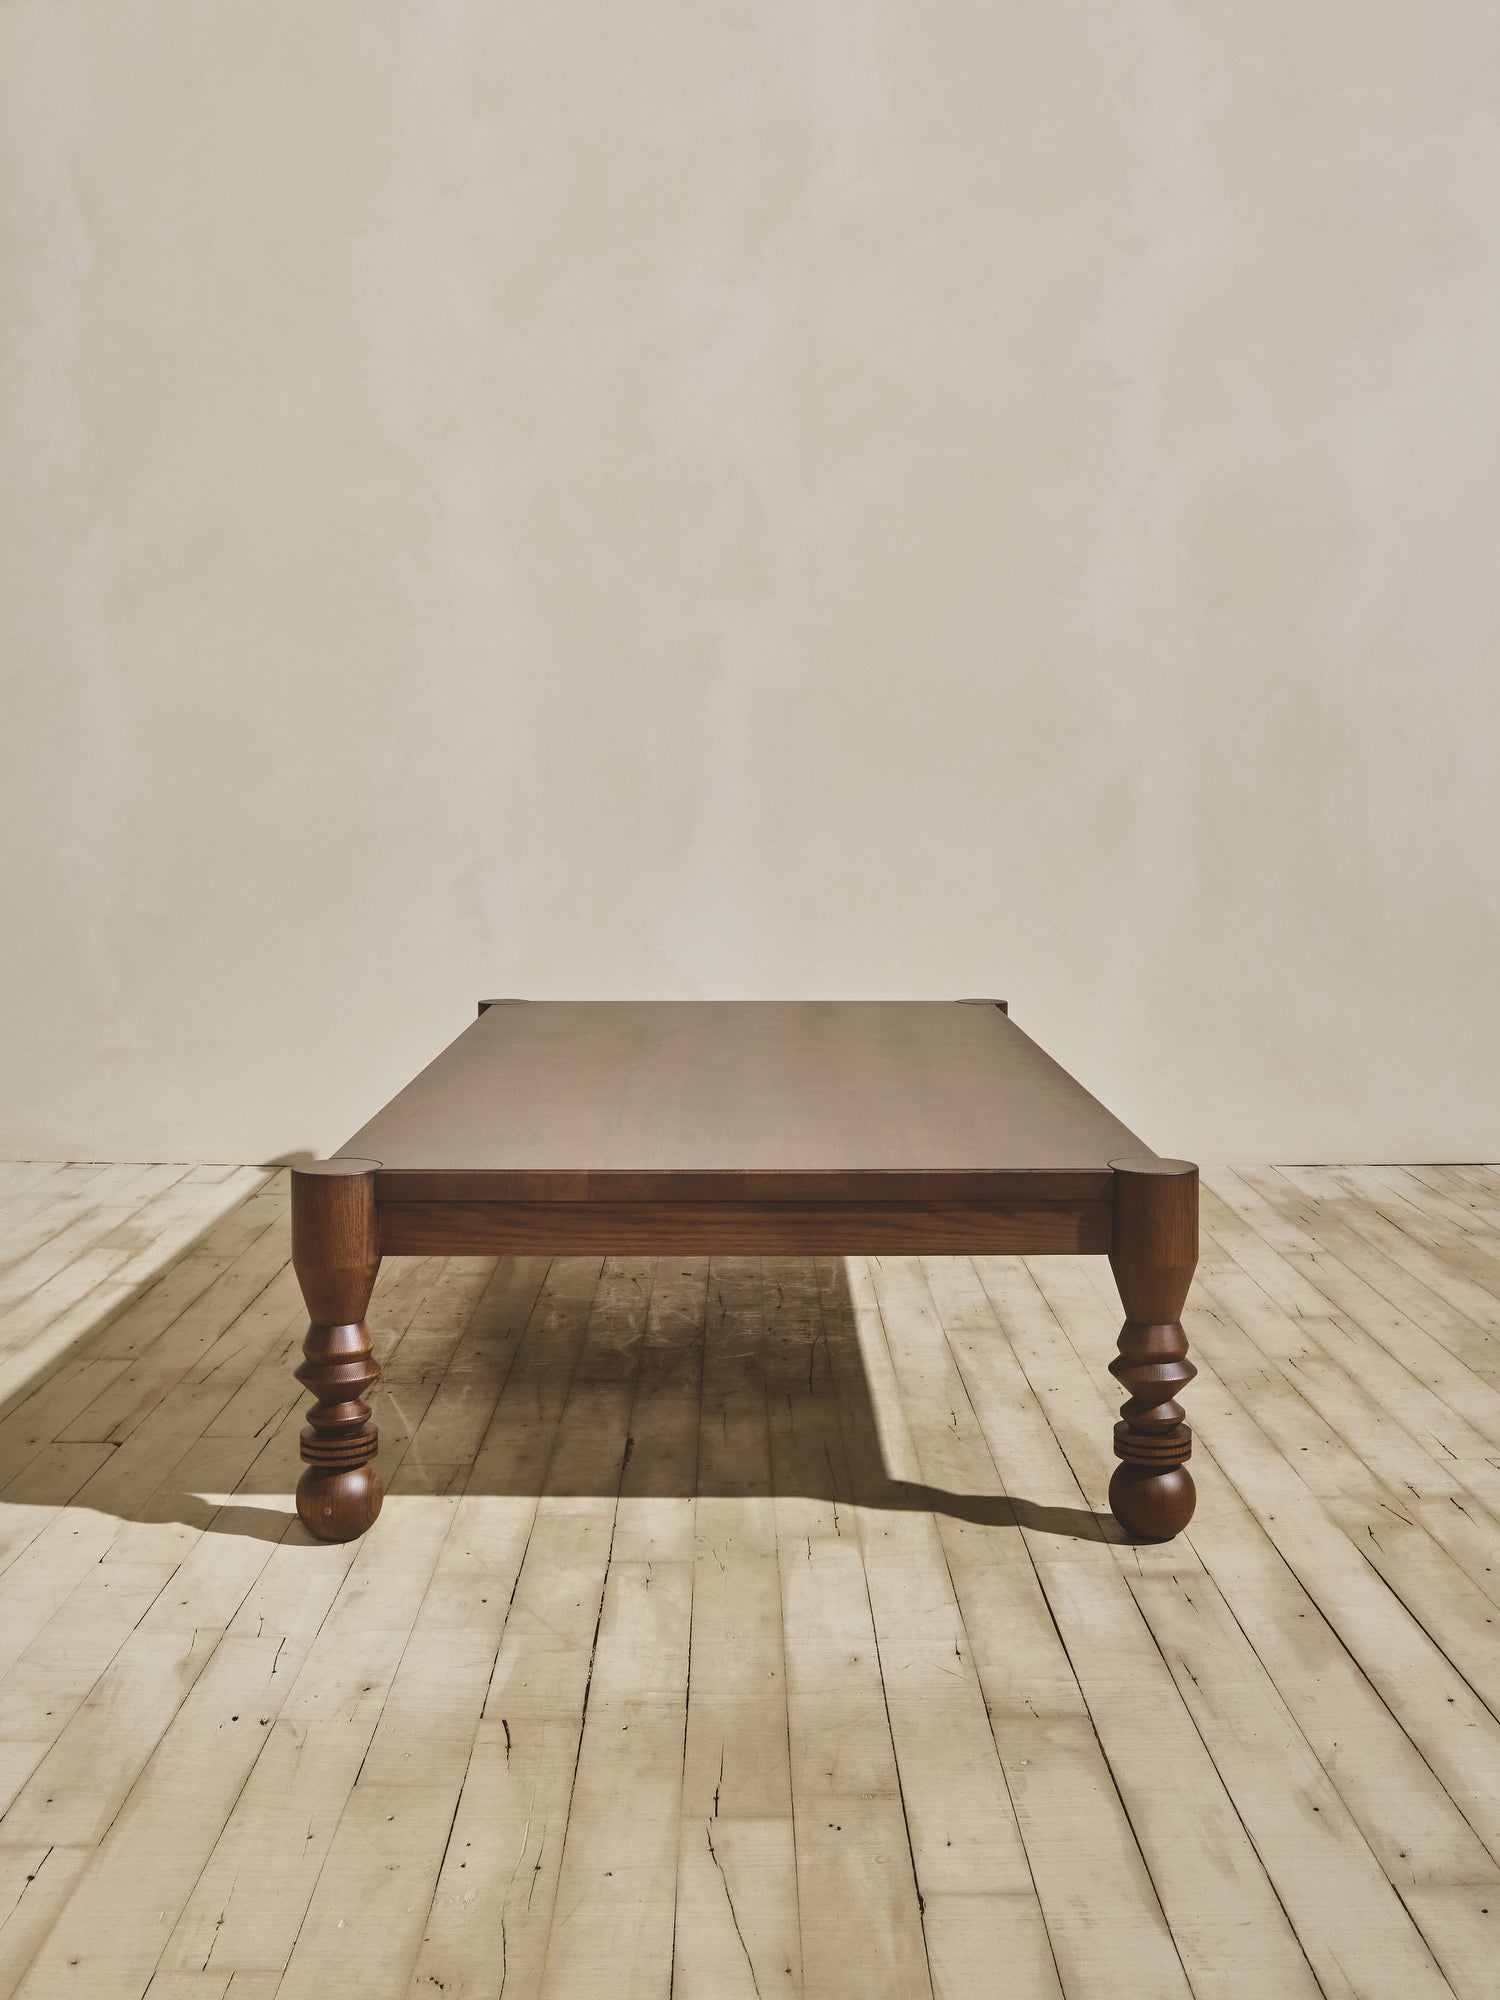 Side view of the natural wood NBL Dining Room Table.